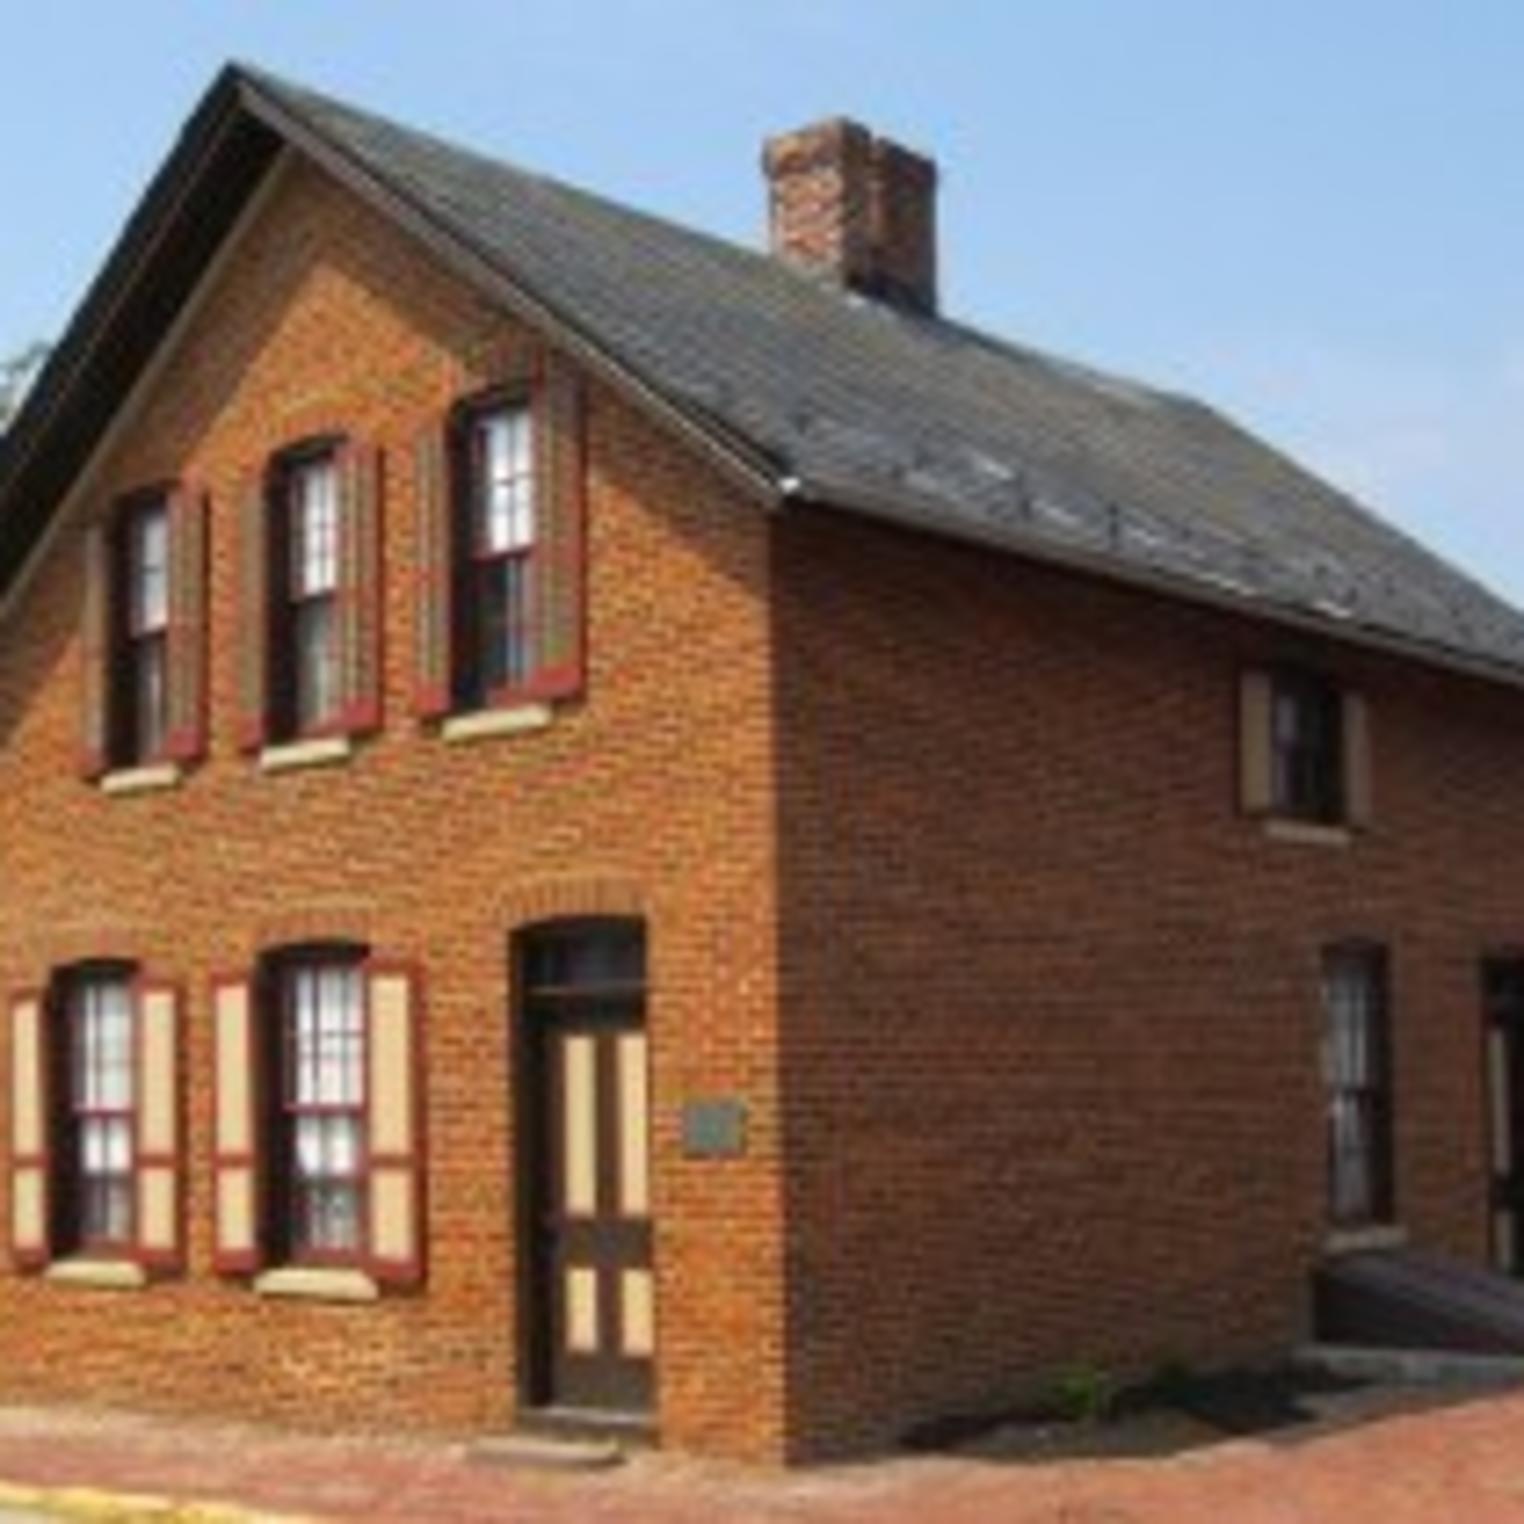 Stationmaster's House